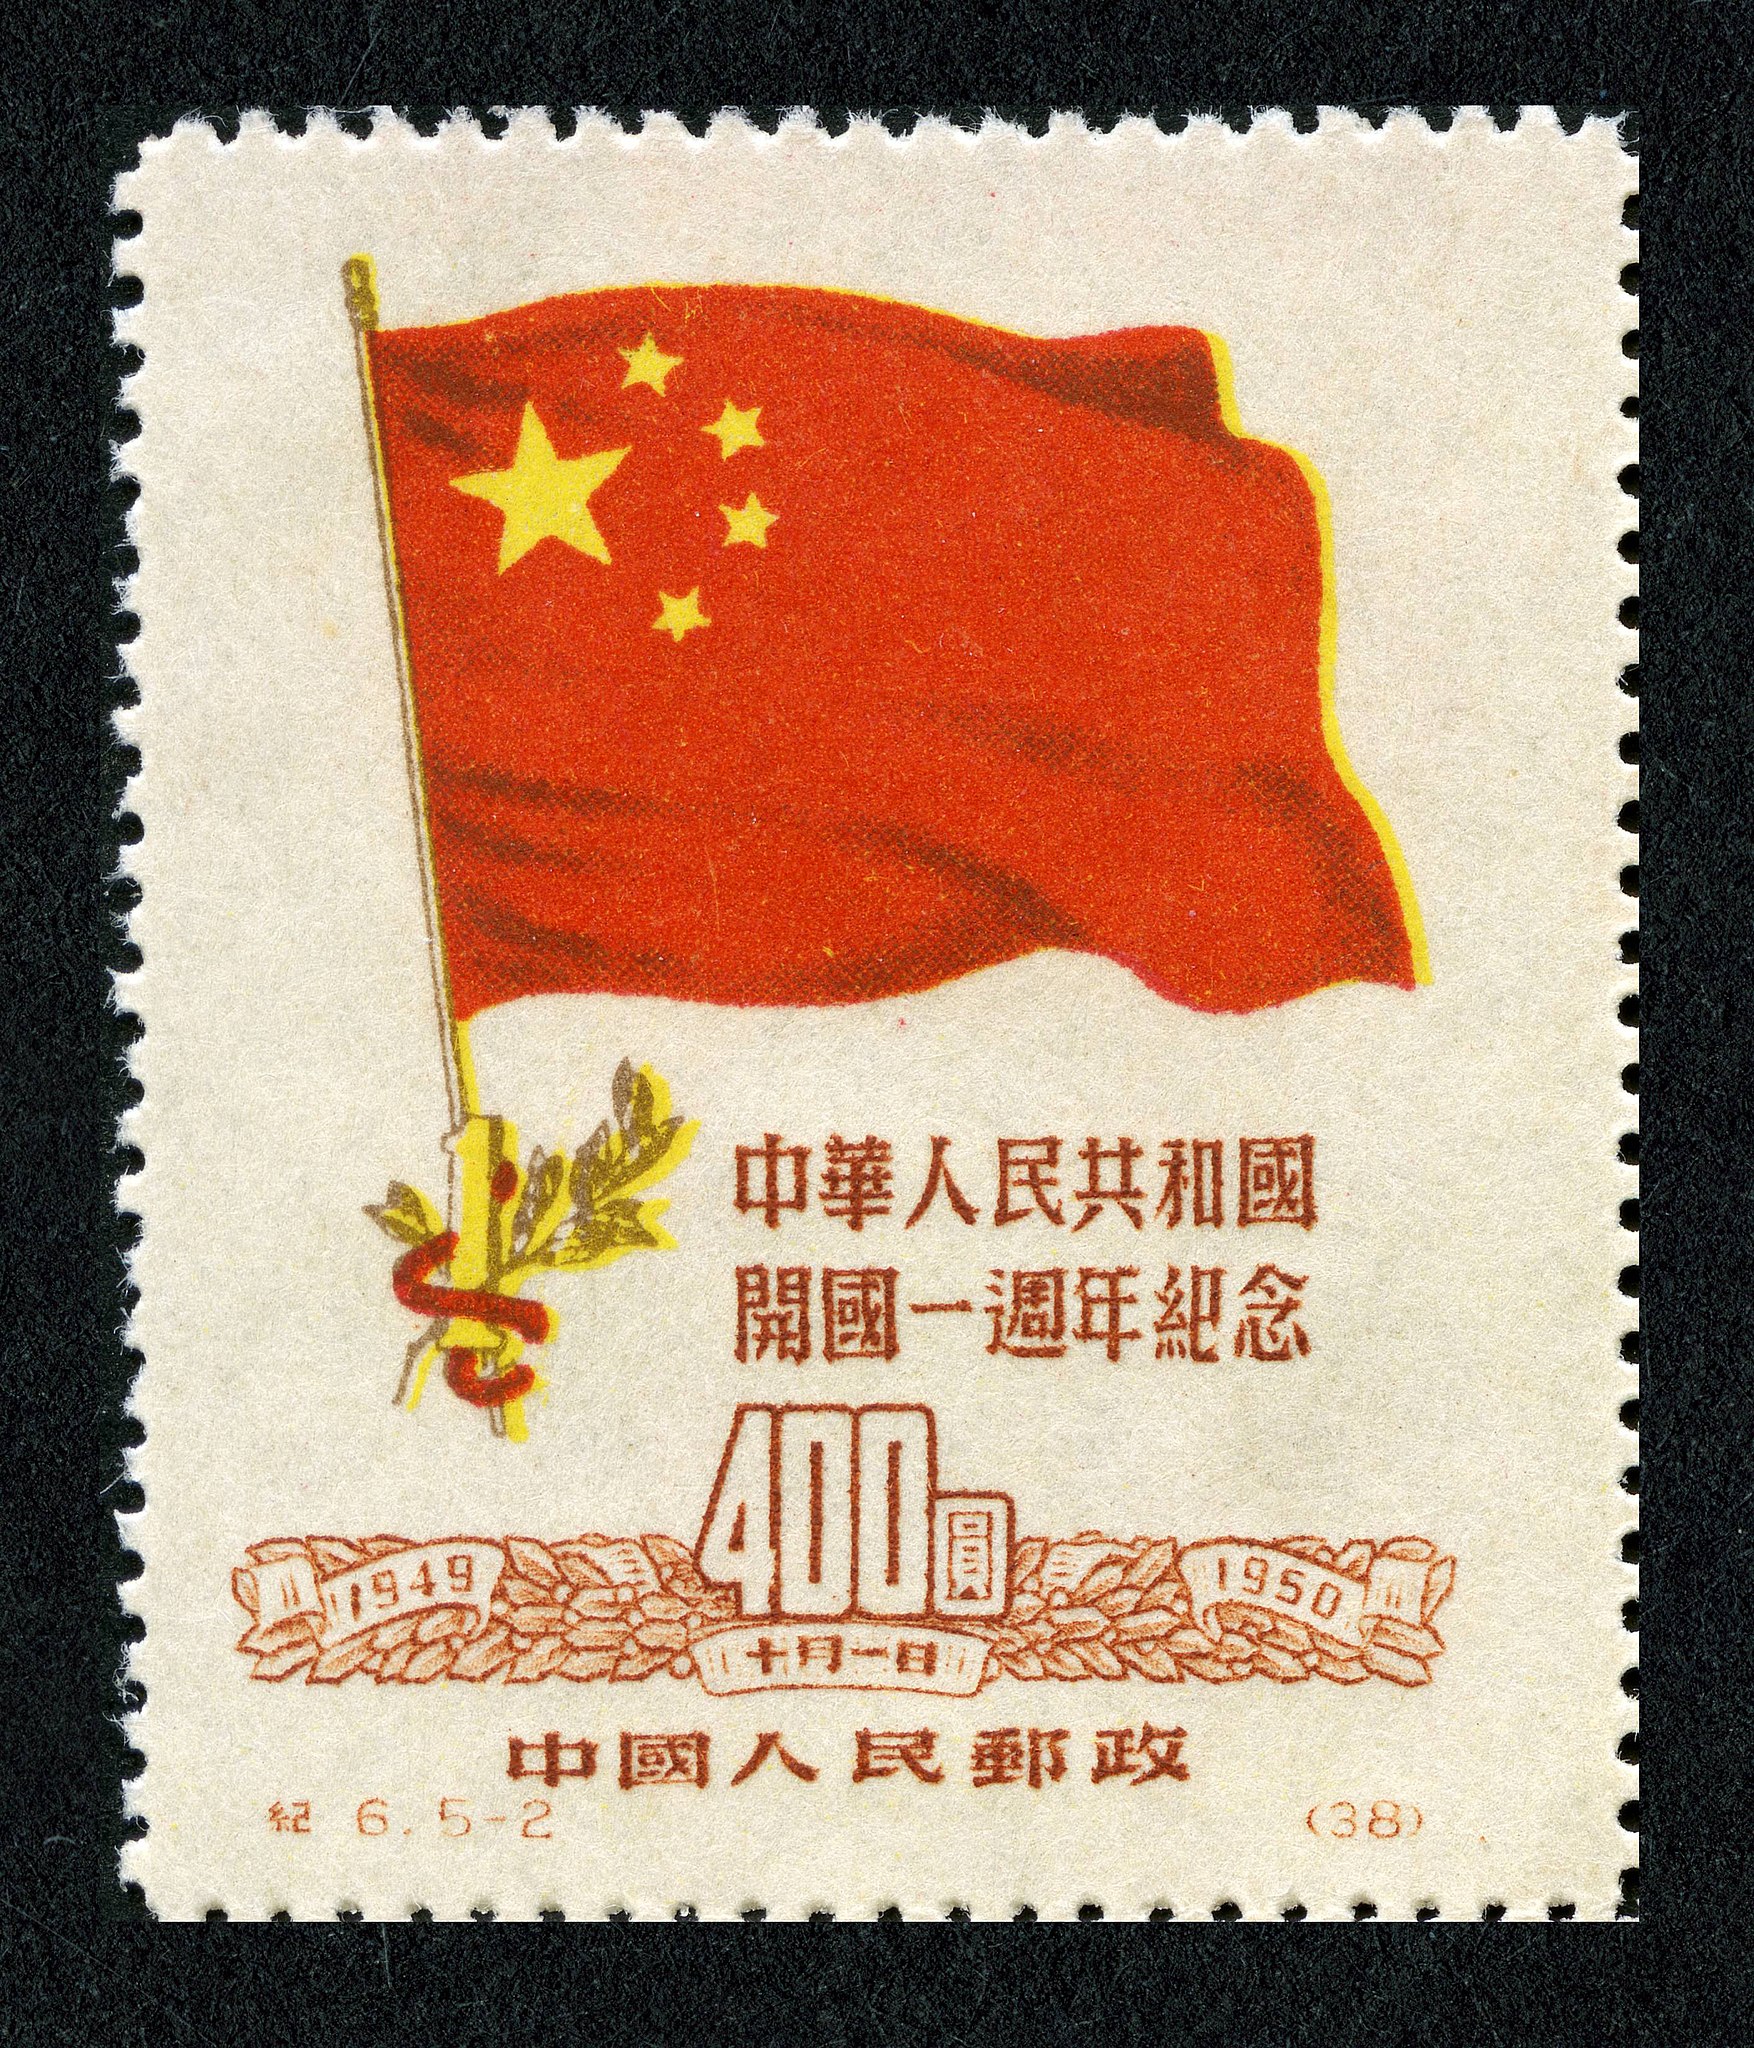 File:Ji6, 5-2, National Flag of the People's Republic of China, 1950.jpg